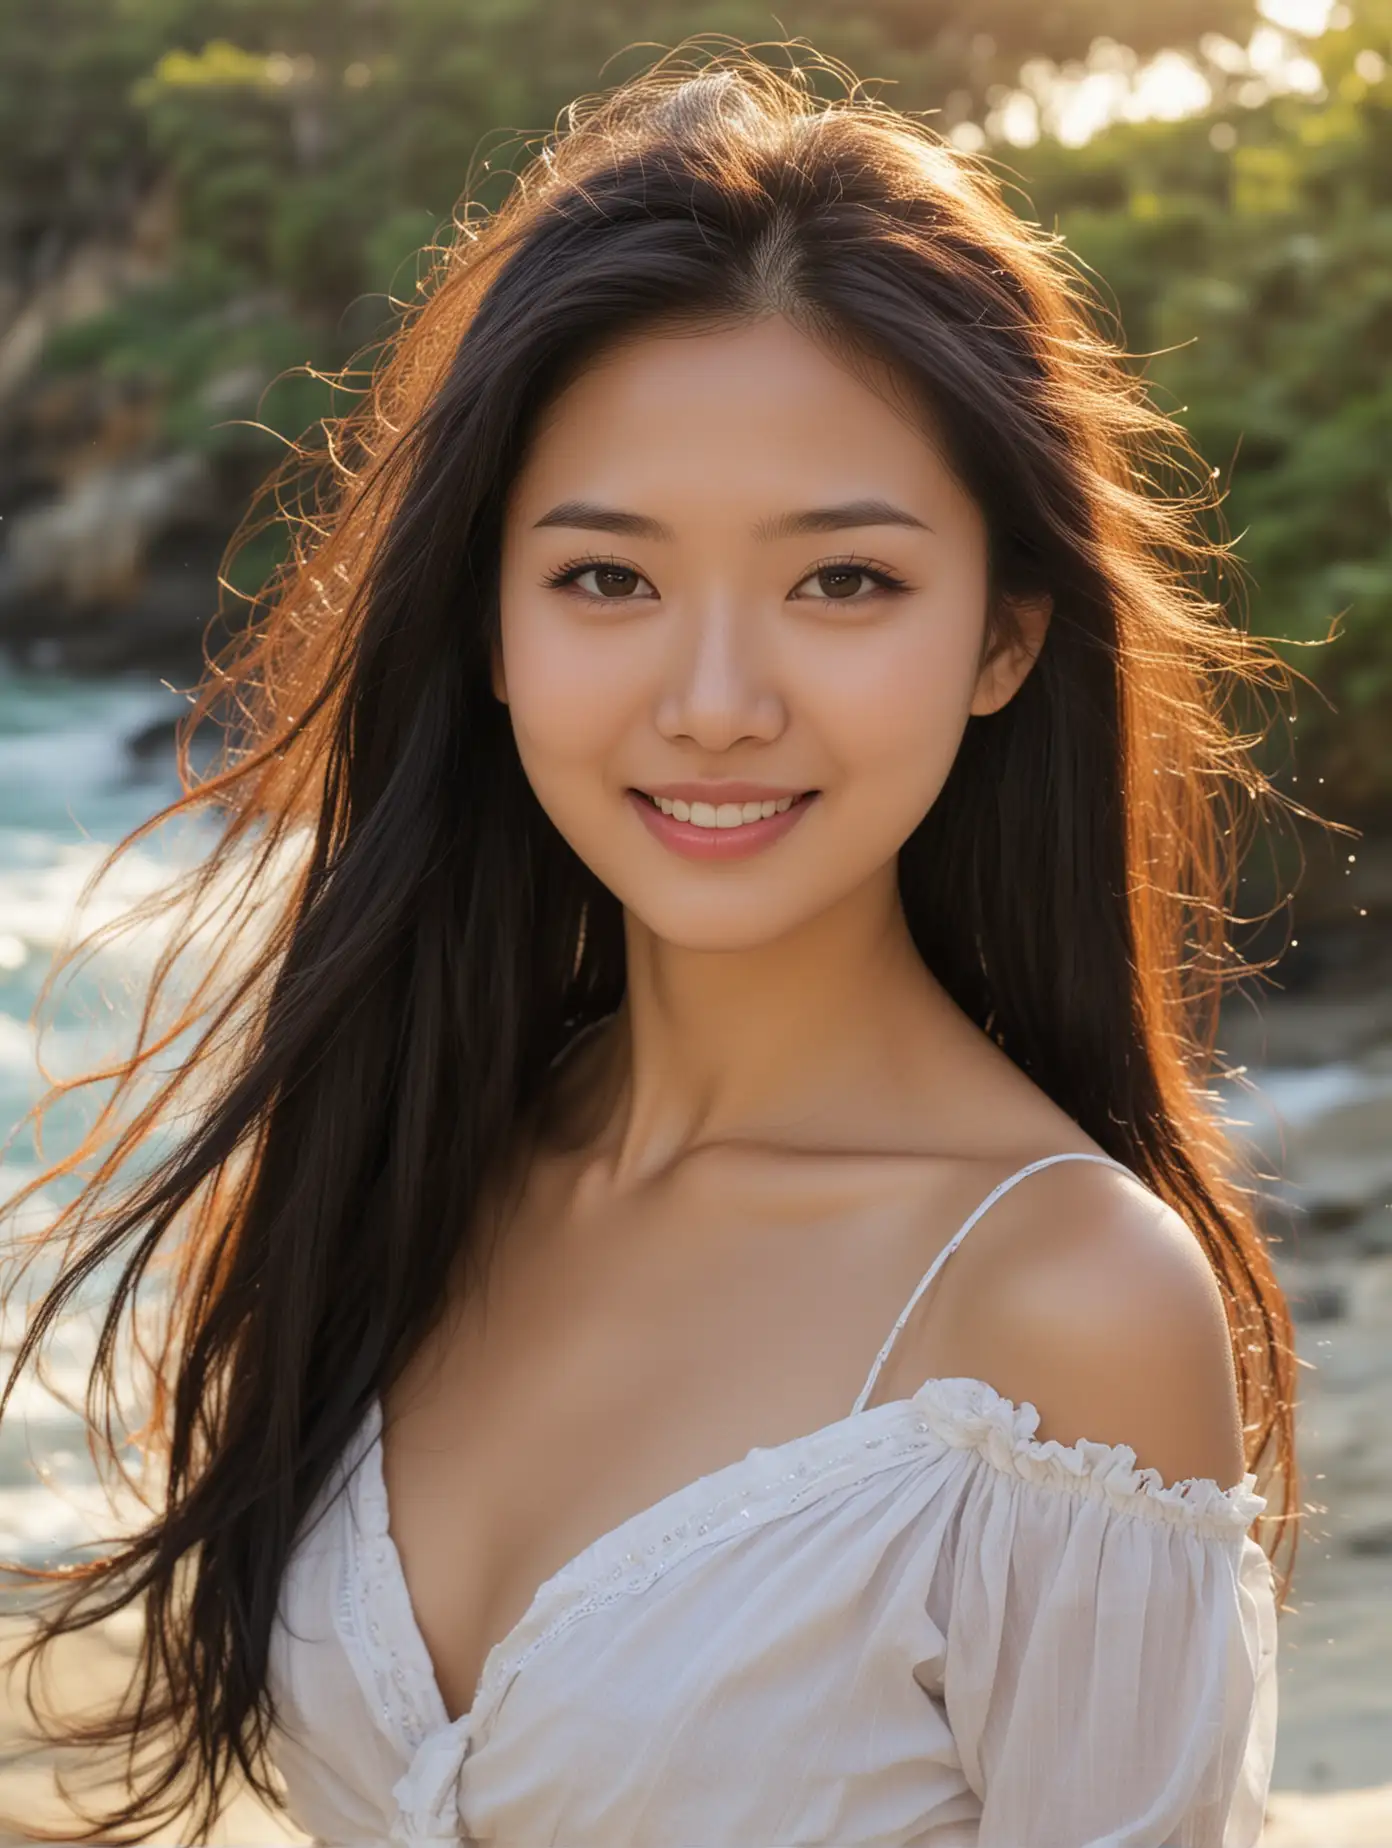 Radiant-Young-Chinese-Woman-with-a-Dreamy-Smile-in-Sunlit-Outdoor-Setting